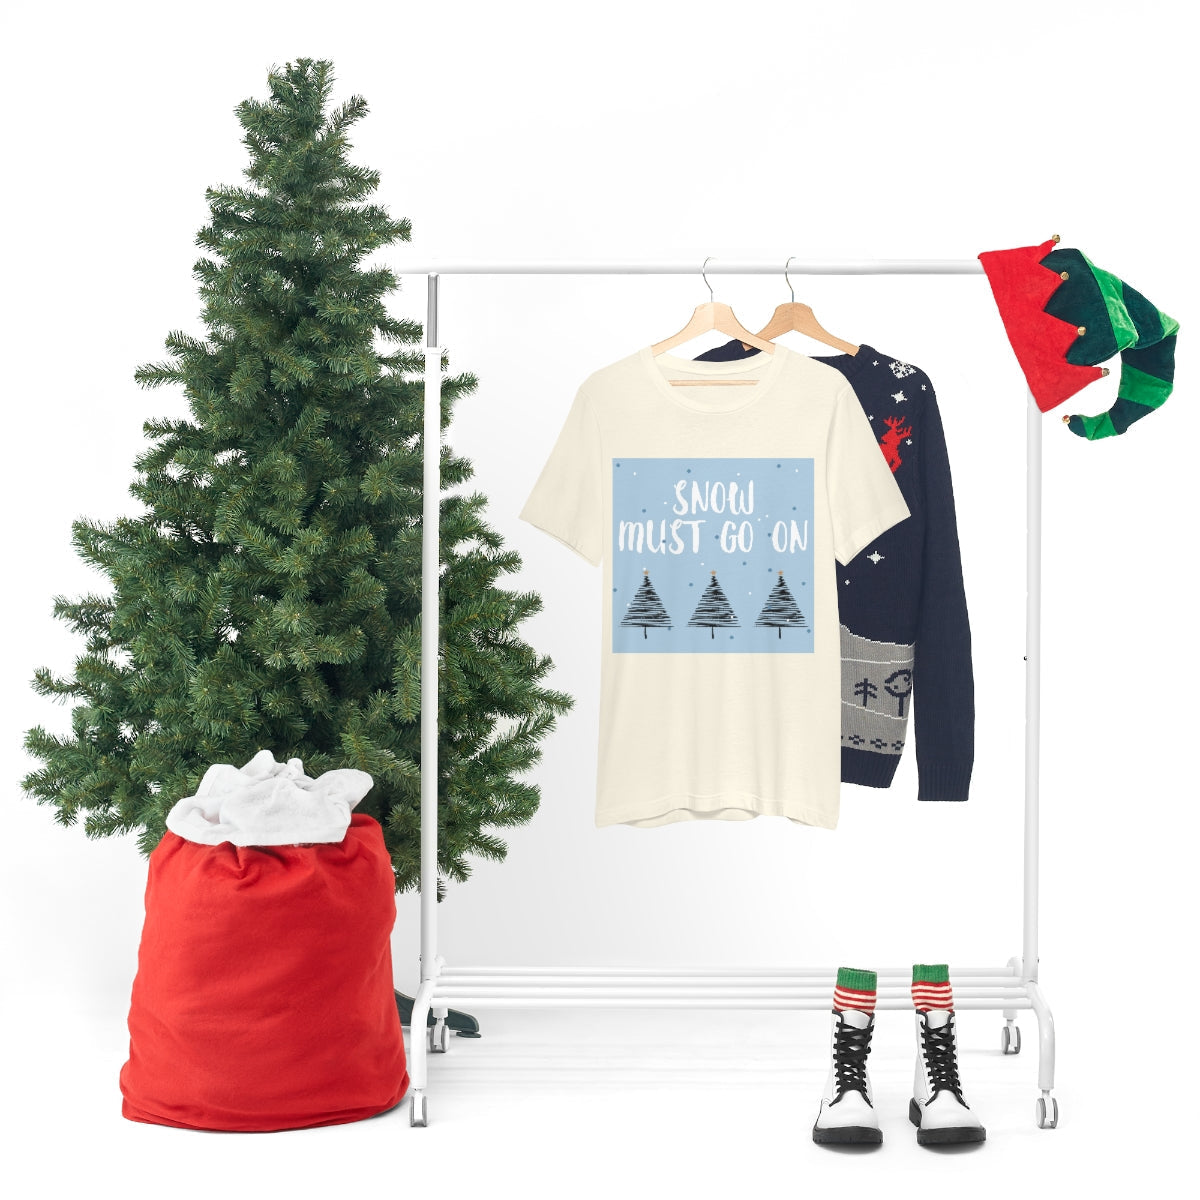 Snow Must Go On Winter Happiness Unisex Jersey Short Sleeve T-Shirt Ichaku [Perfect Gifts Selection]